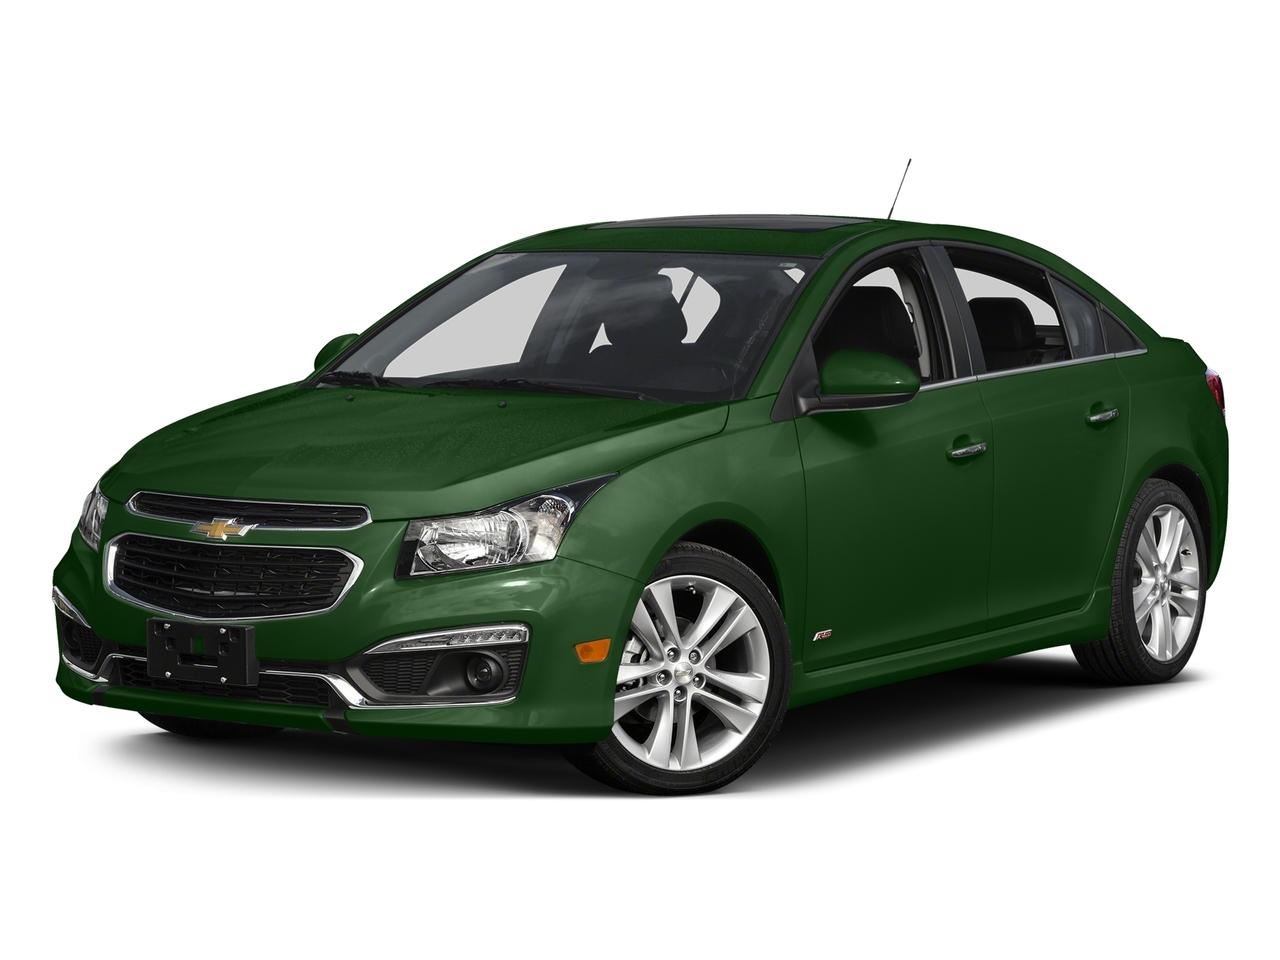 COLLINSVILLE Green 2015 Chevrolet Cruze: Used Car for Sale - L231948A